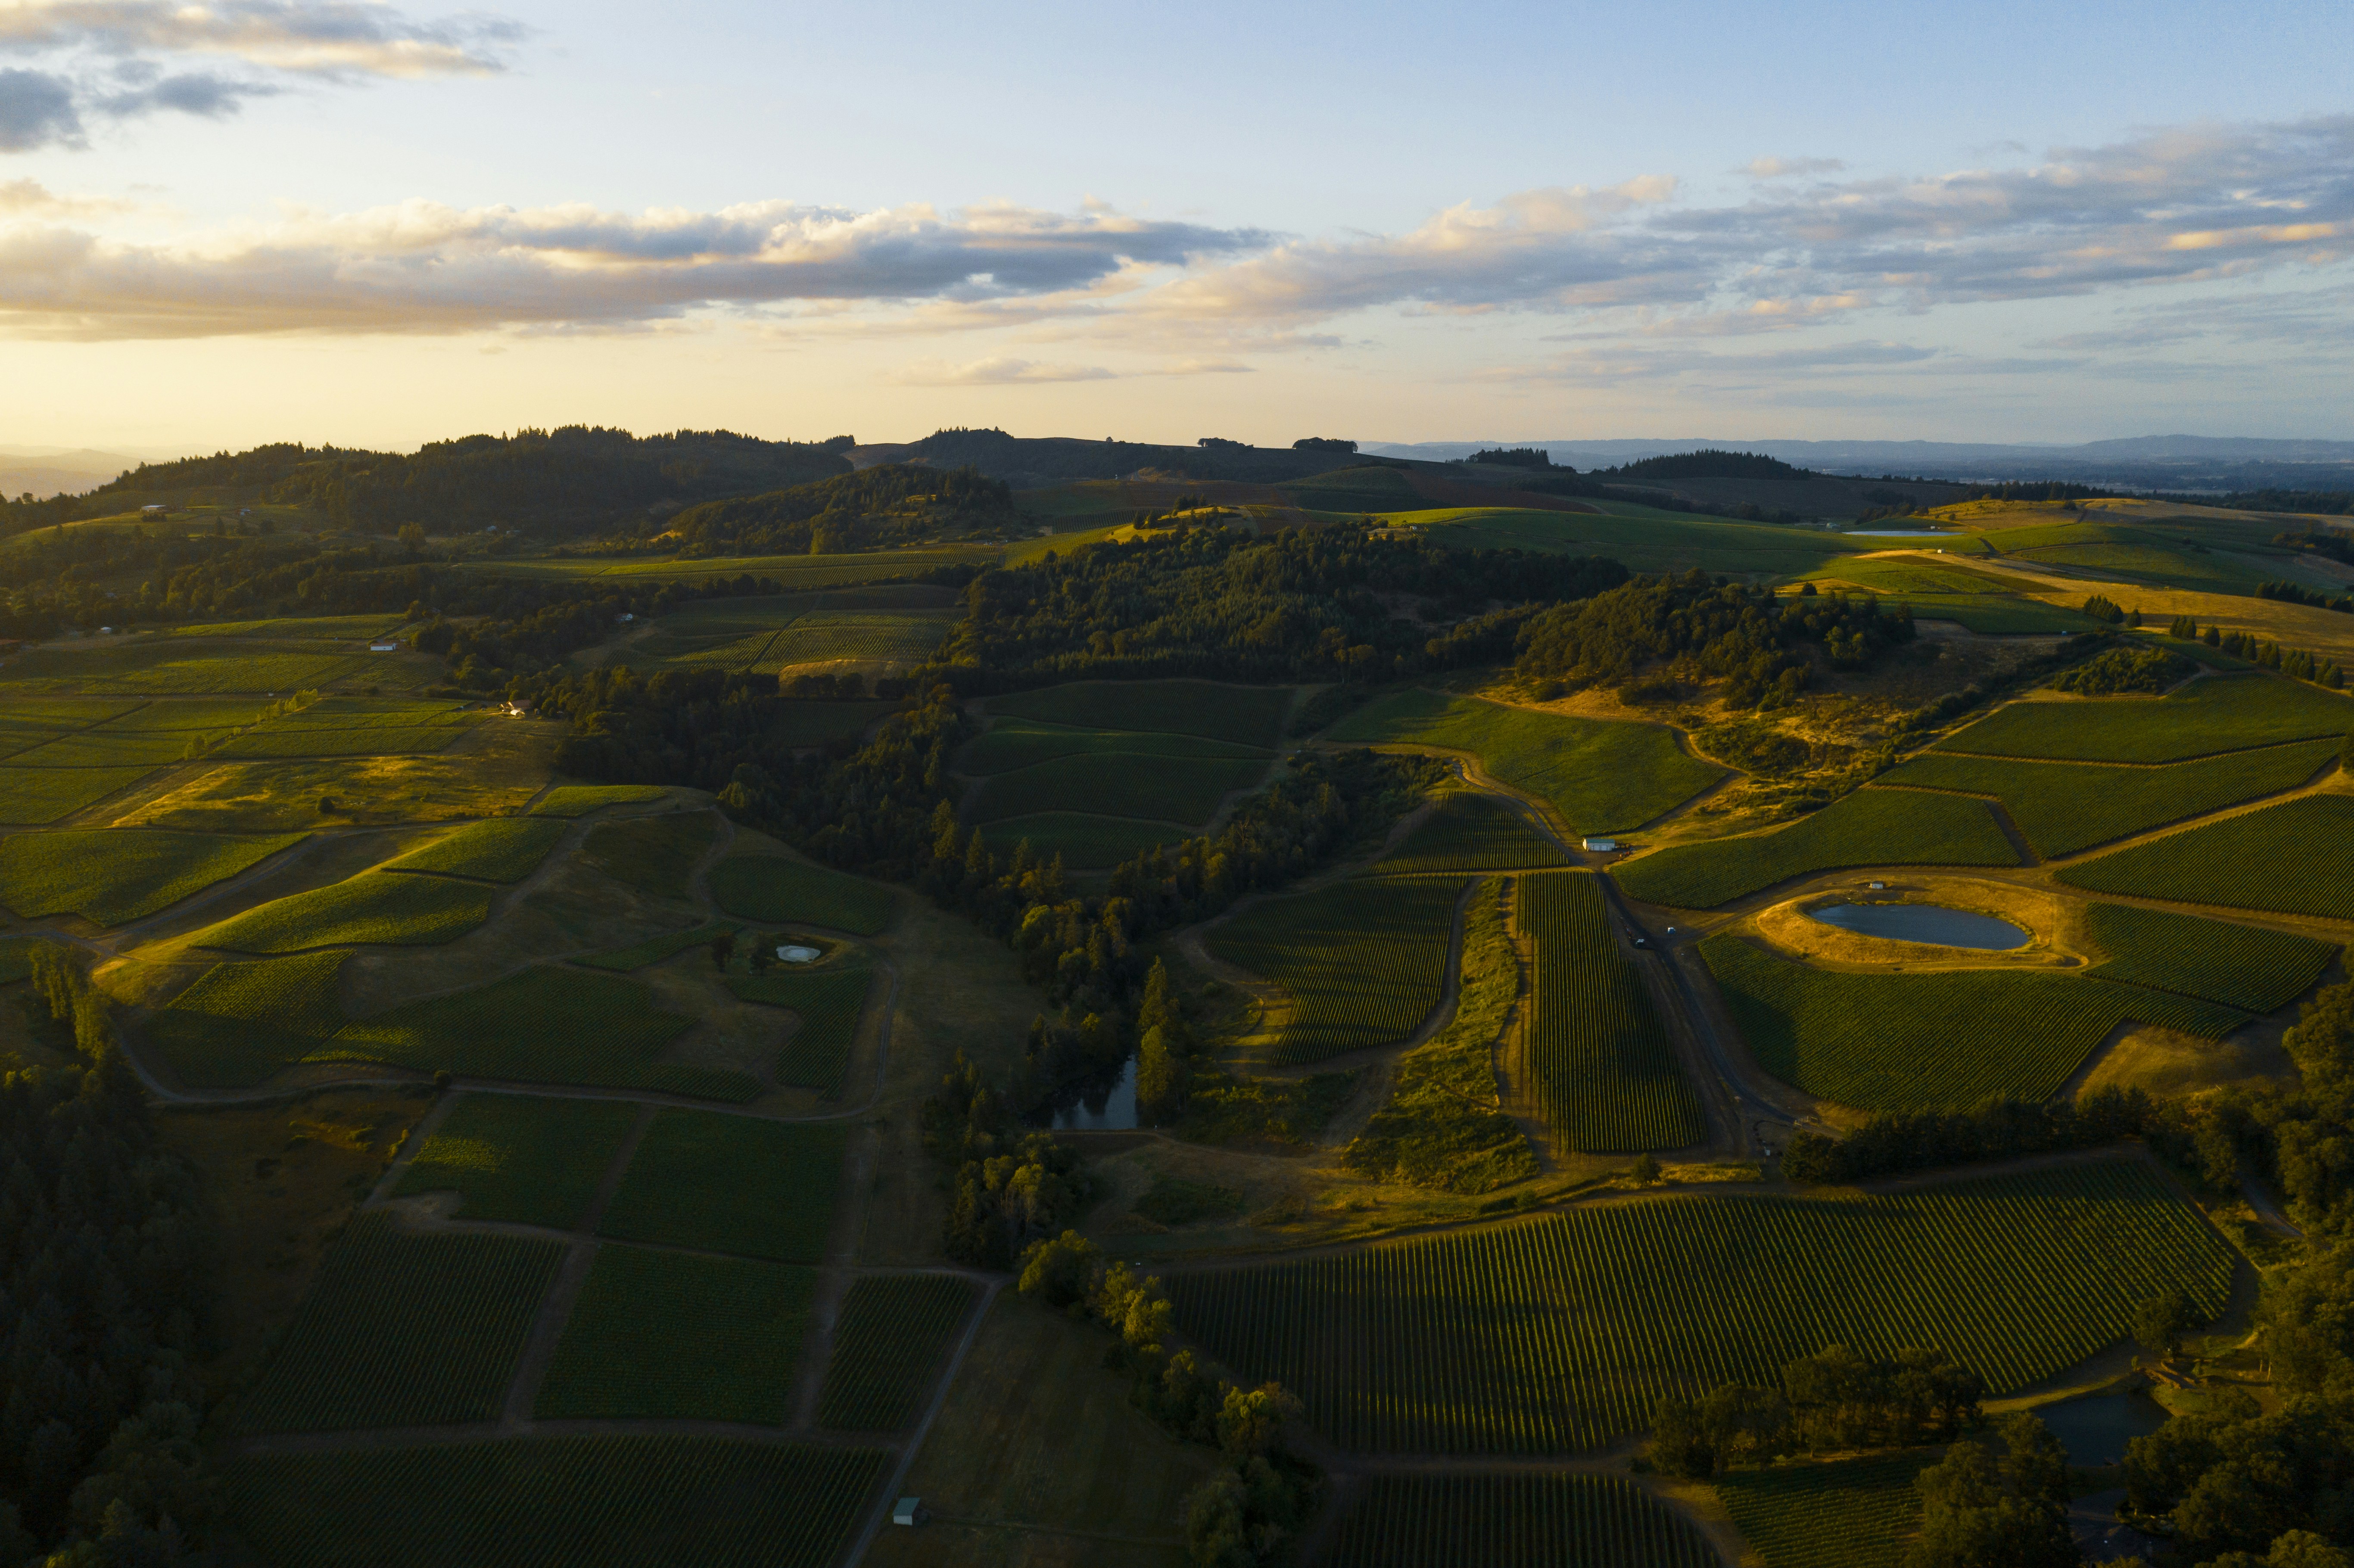 Wine lovers: This is your happy place. Wine country in the Willamette Valley in Oregon, at sunset. Whenever I fly my drone, I usually take a photo right after taking off and one right before landing. These are usually throw-away photos that simply help me remember exactly where I was at in case I want to go back. However, this shot of the vineyards scattered over those rolling fields was worthy of sharing.